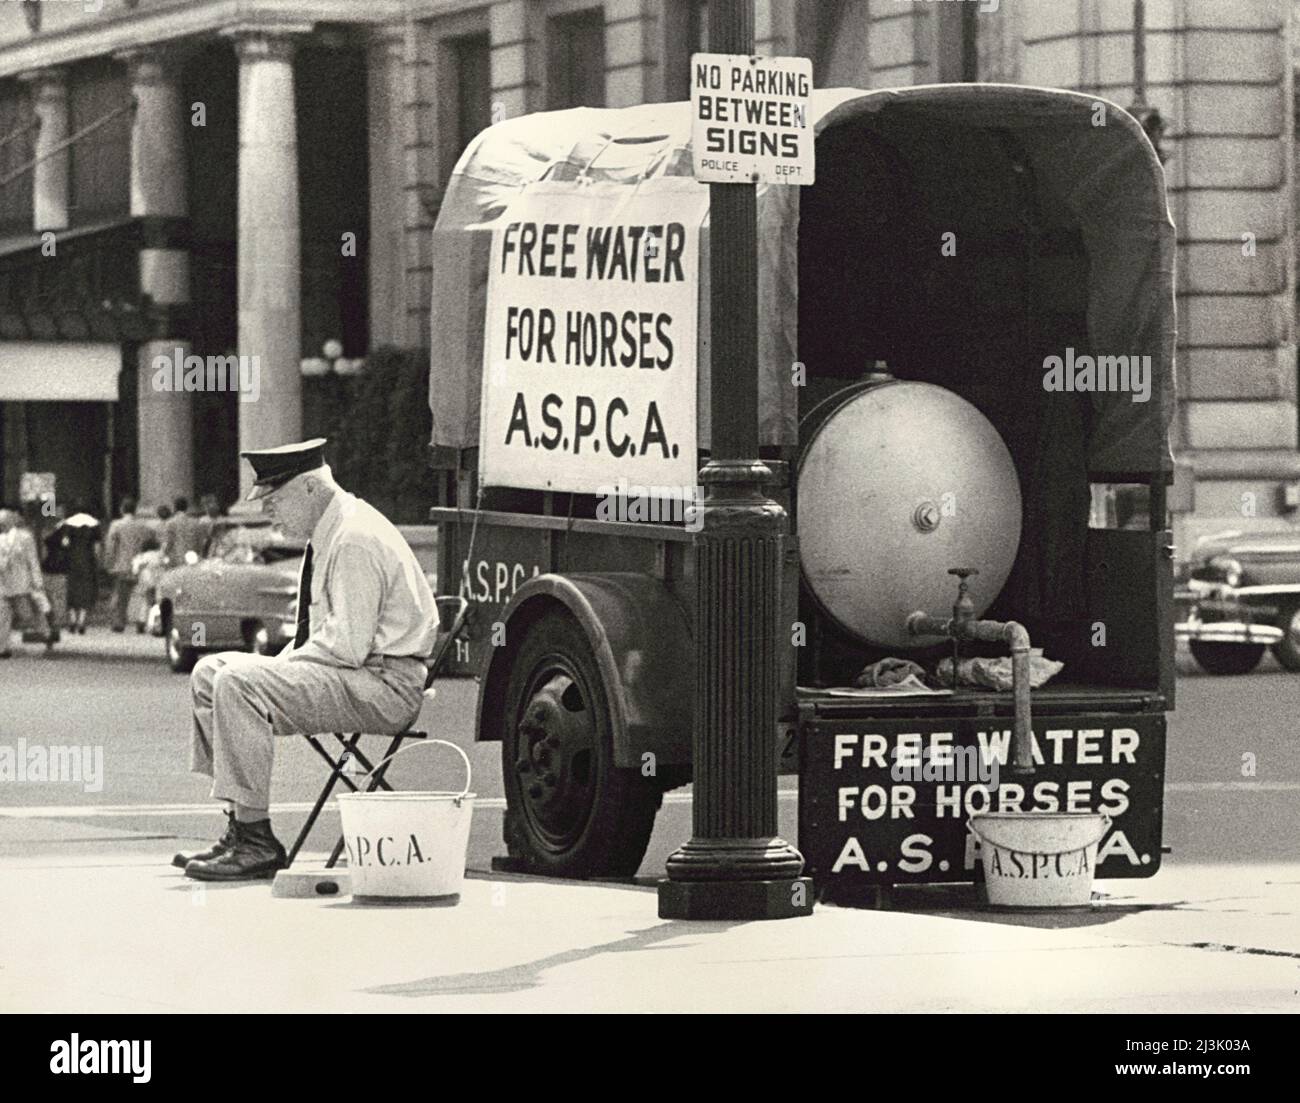 Man sitting on Chair near Wagon with Water Tank in back to provide horses  with free water by the American Society for the Prevention of Cruelty to  Animals, Sign on trailer reads 